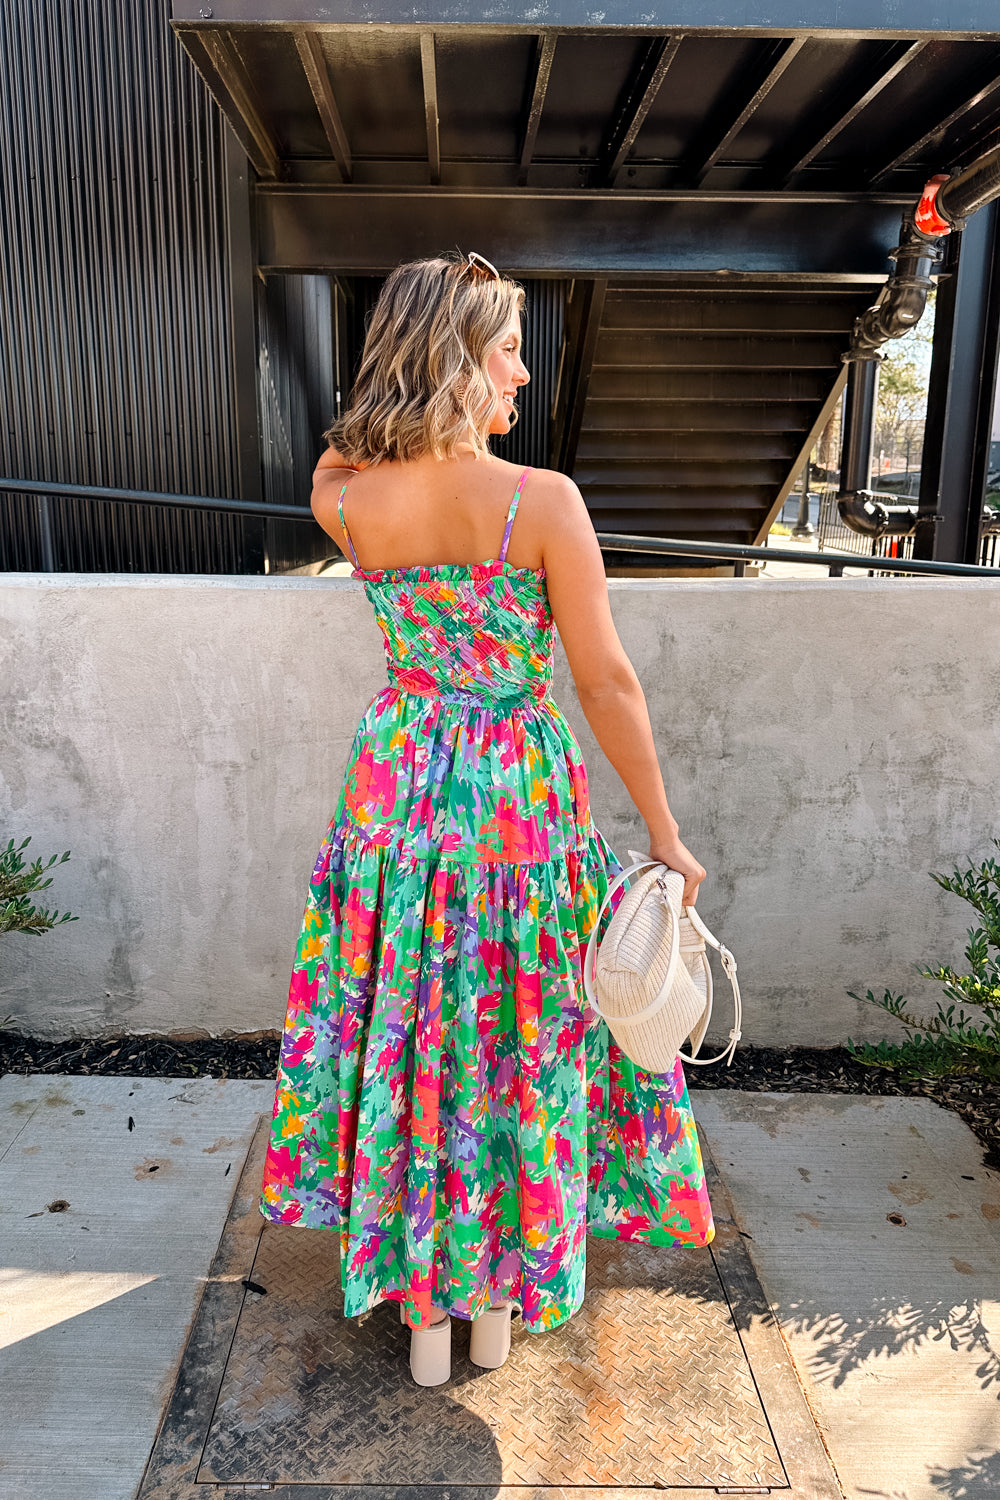 Full body back view of female model wearing the Leilani Printed Sleeveless Maxi Dress that has a multi-colored green, red, pink, purple, and yellow print, spaghetti straps, a smocked upper, and a tiered skirt.